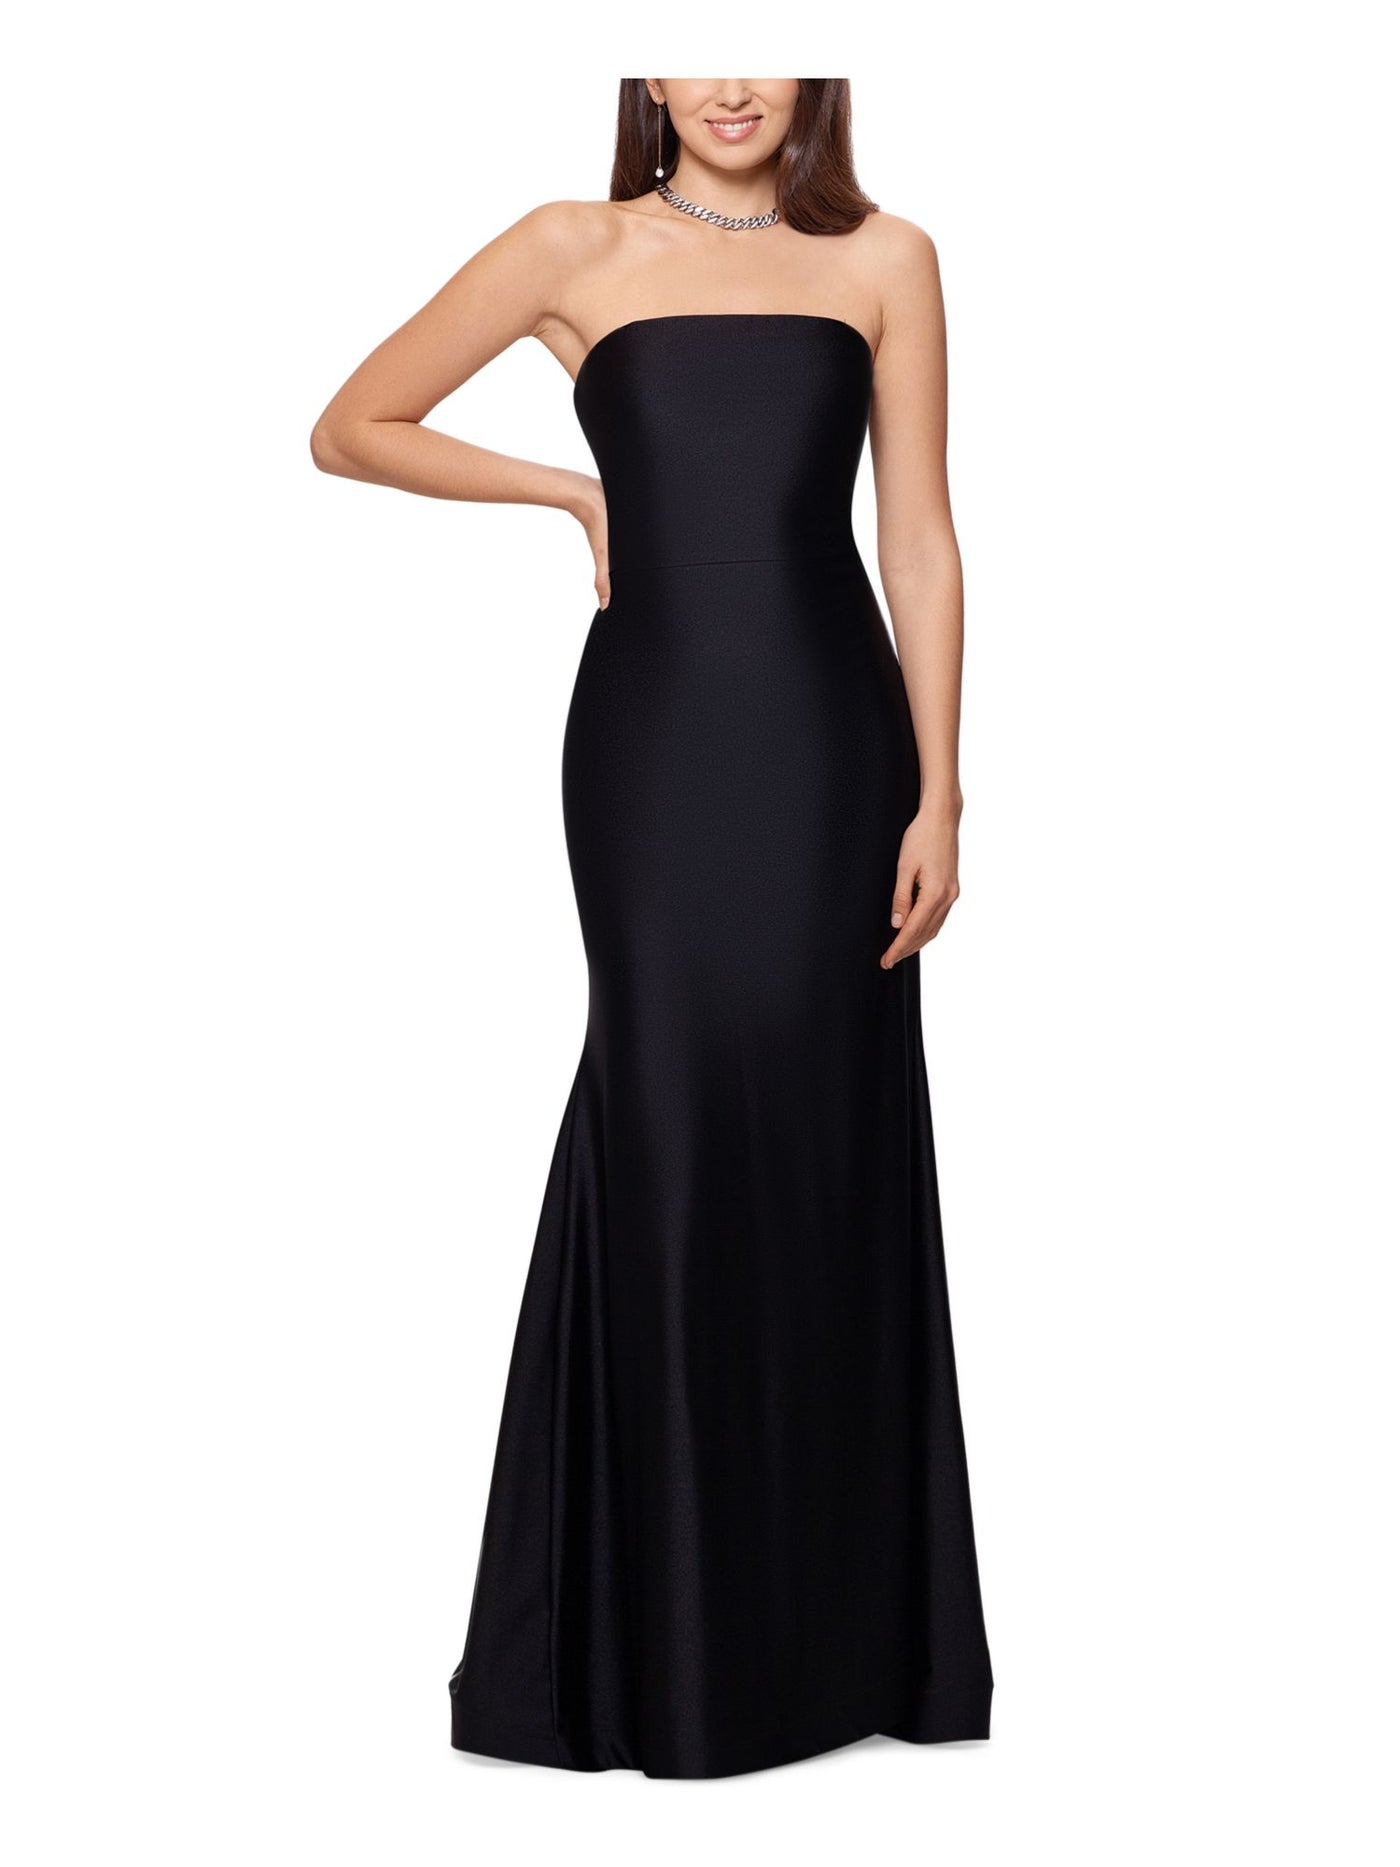 XSCAPE Womens Stretch Zippered Sateen Fabric Lined Sleeveless Strapless Full-Length Formal Gown Dress